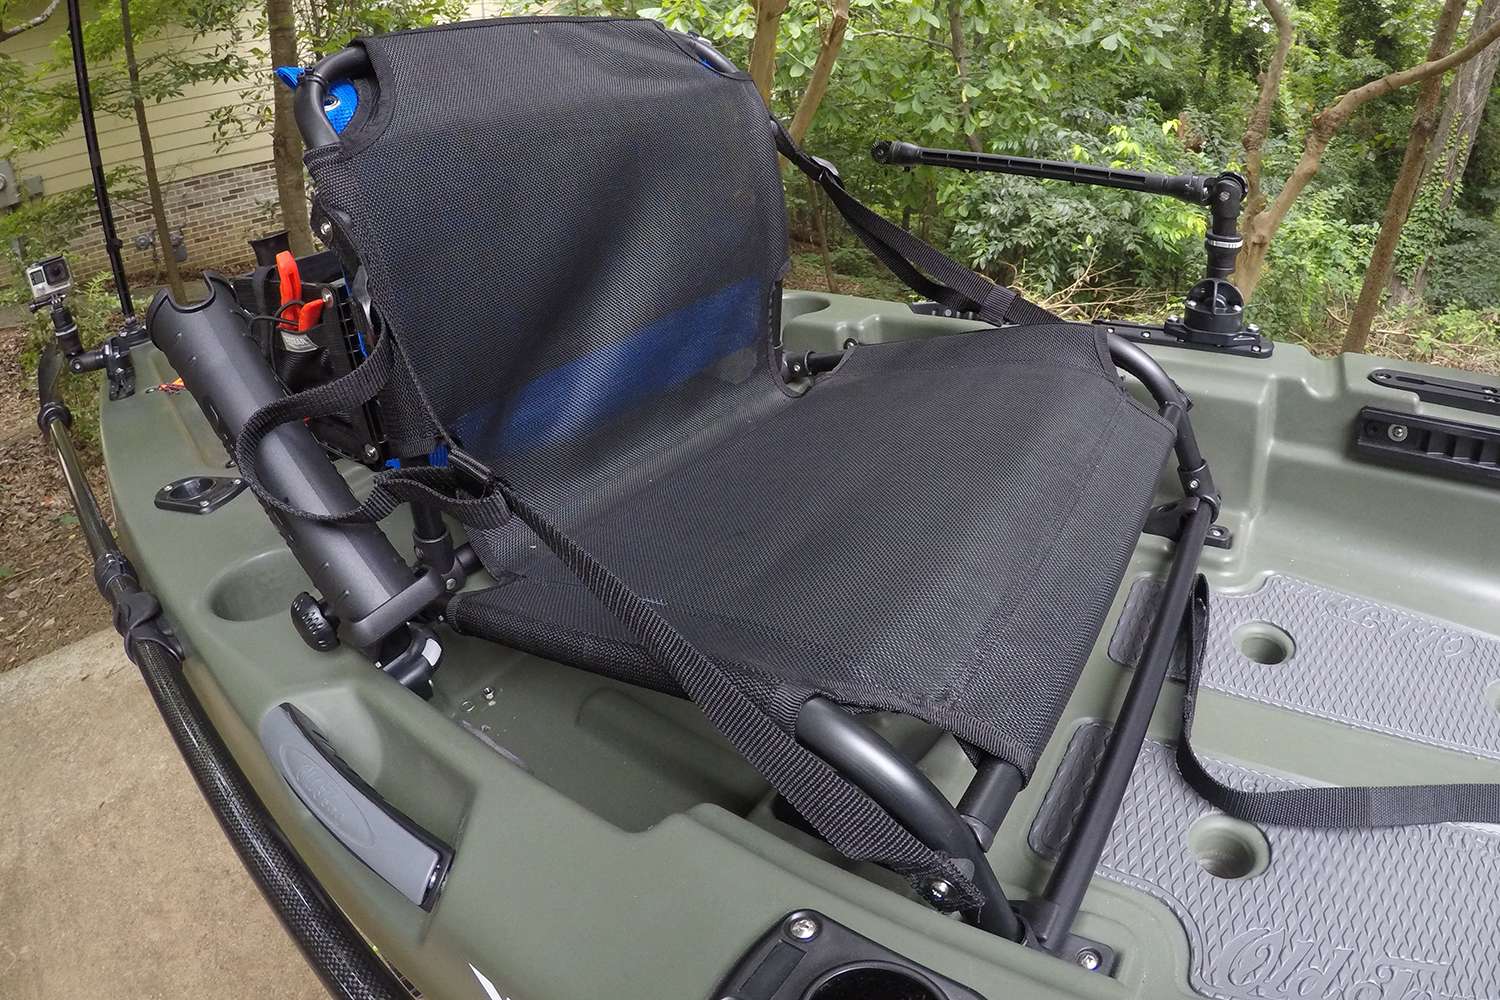 As usual for Old Town fishing kayaks, the seat is supportive, comfortable and easily adjustable. 